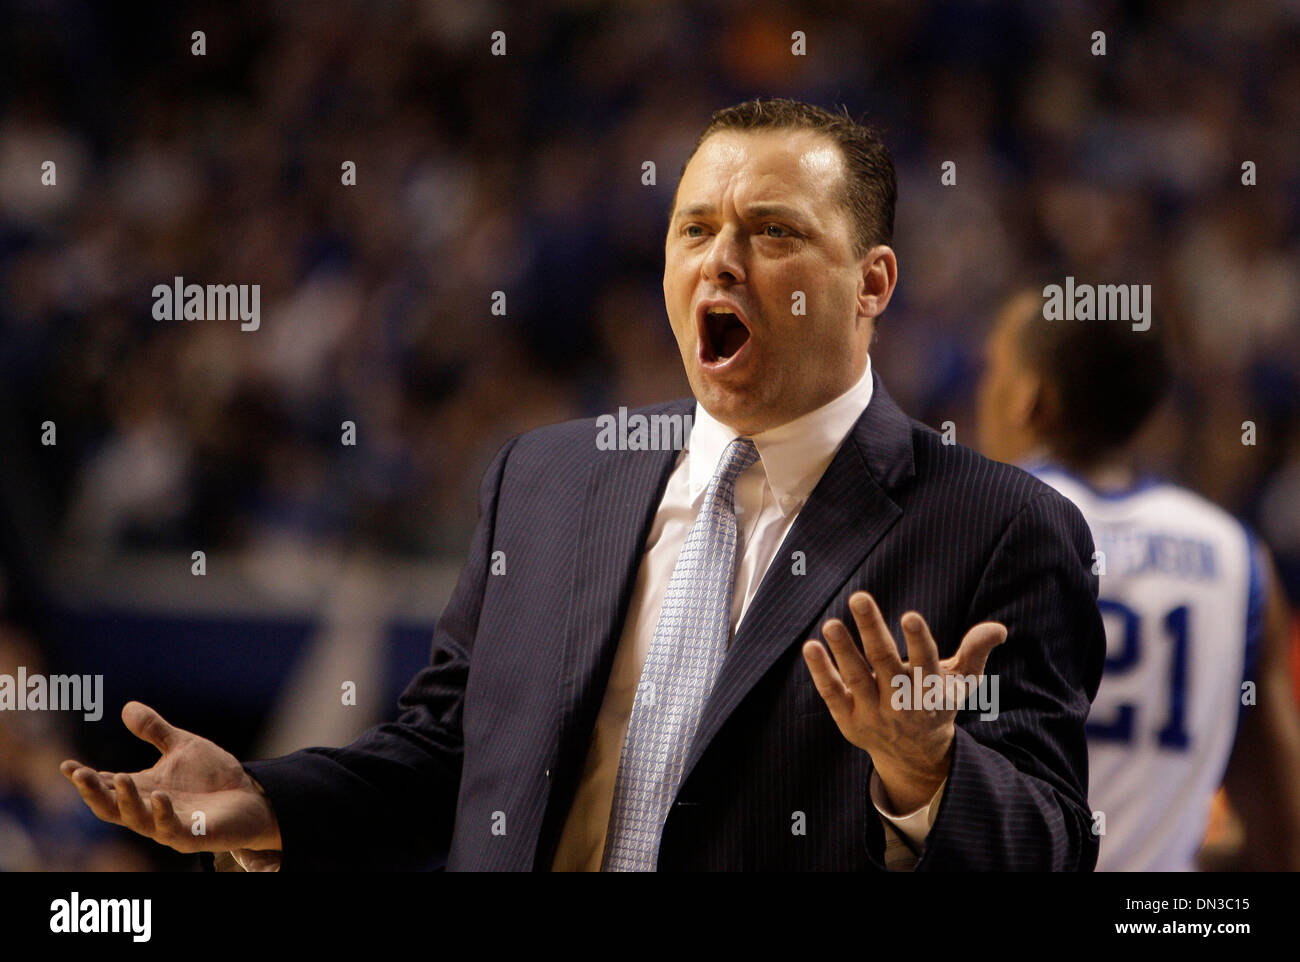 UK head coach Billy Gillispie reacted in the second half of the University of Kentucky vs. Tennessee basketball game on Saturday, Feb. 21, 2009 in Rupp Arena in Lexington.   UK won 77-58.  Photo by David Perry  (Credit Image: © Lexington Herald-Leader/ZUMA Press) Stock Photo